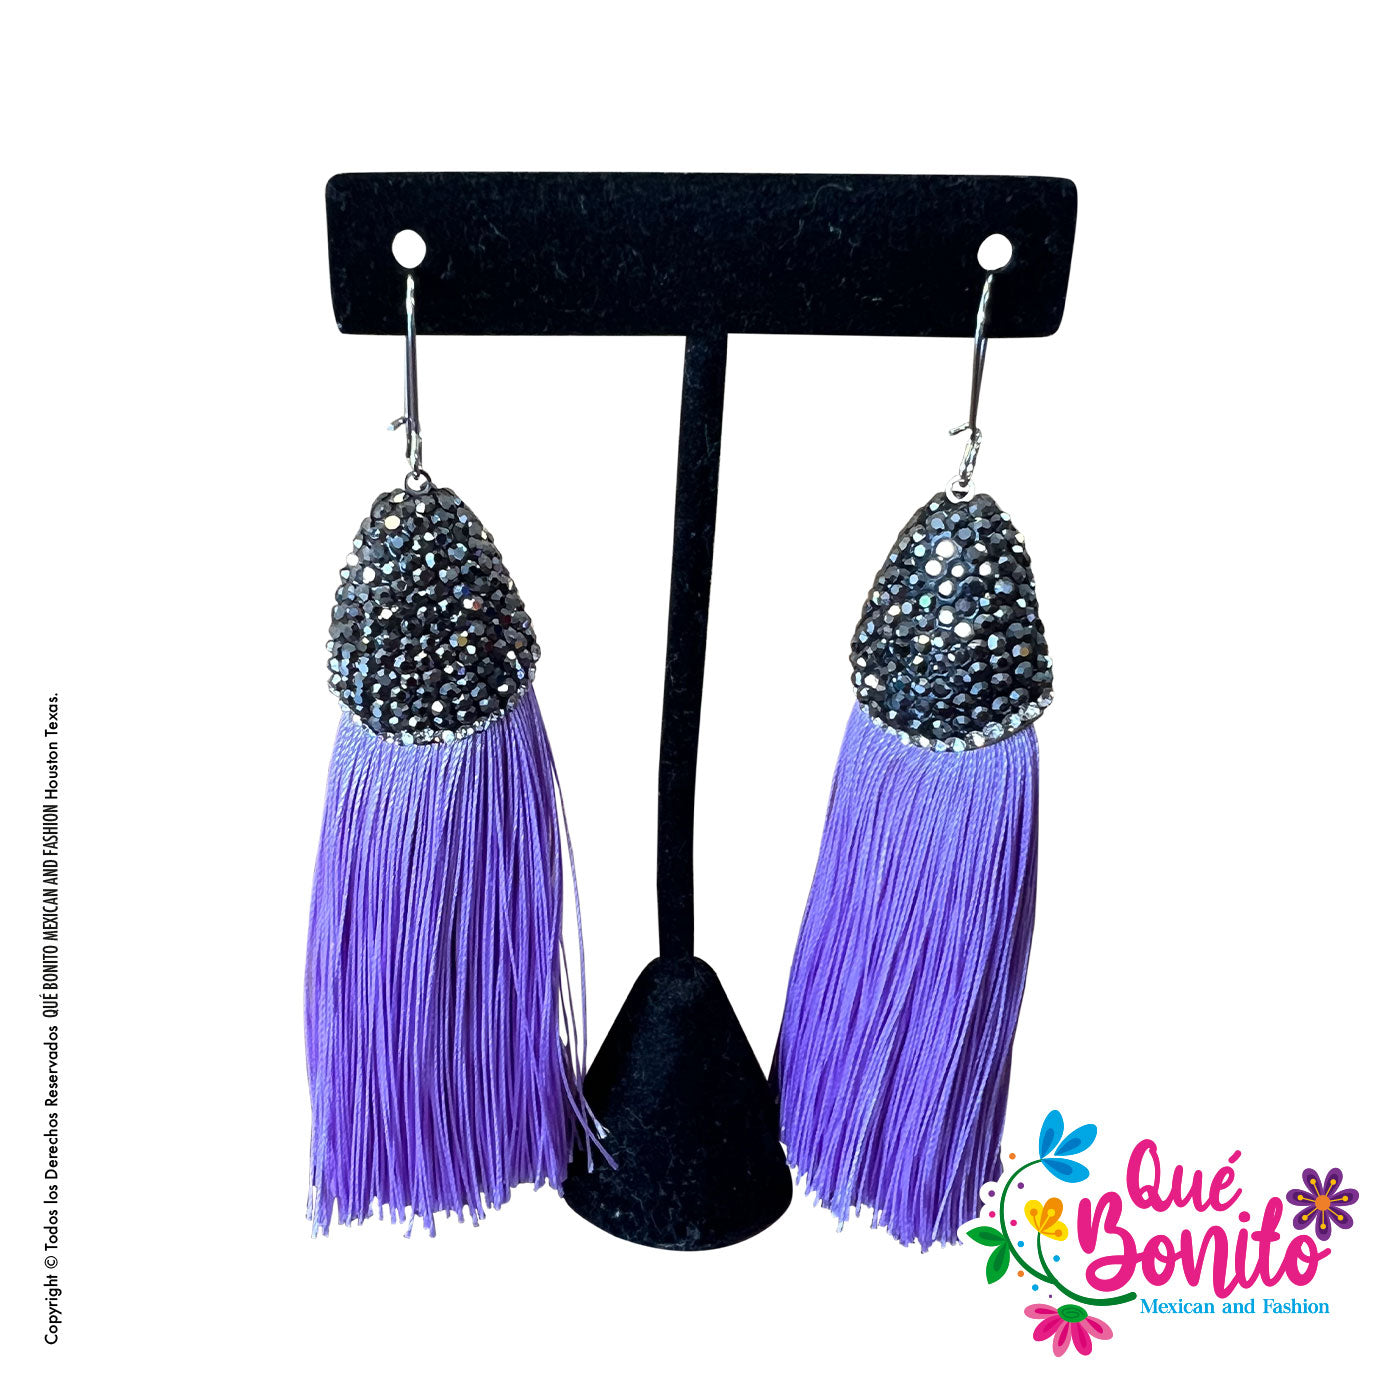 Sparkling Purple Earrings  Que Bonito Mexican and Fashion